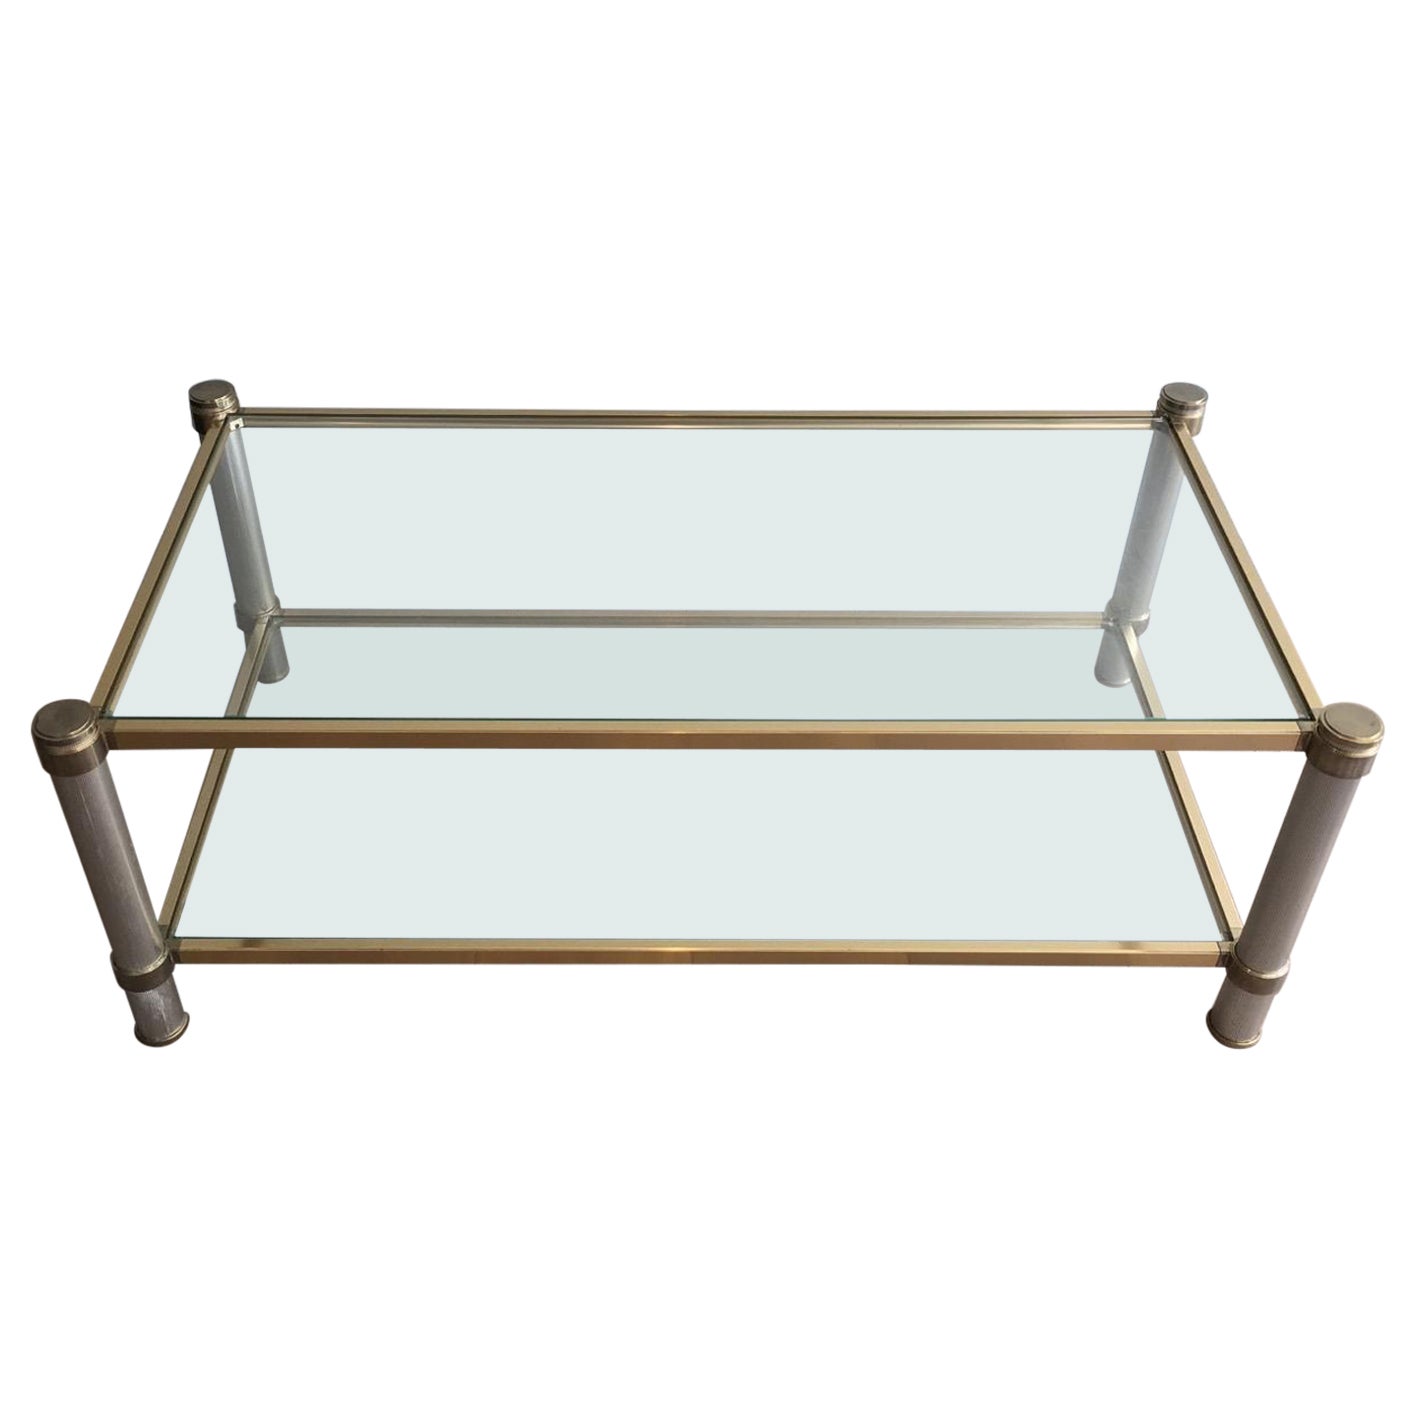  Gold Gilt and Silver Color Aluminium Coffee table with Fluted Legs by P. Vandel For Sale